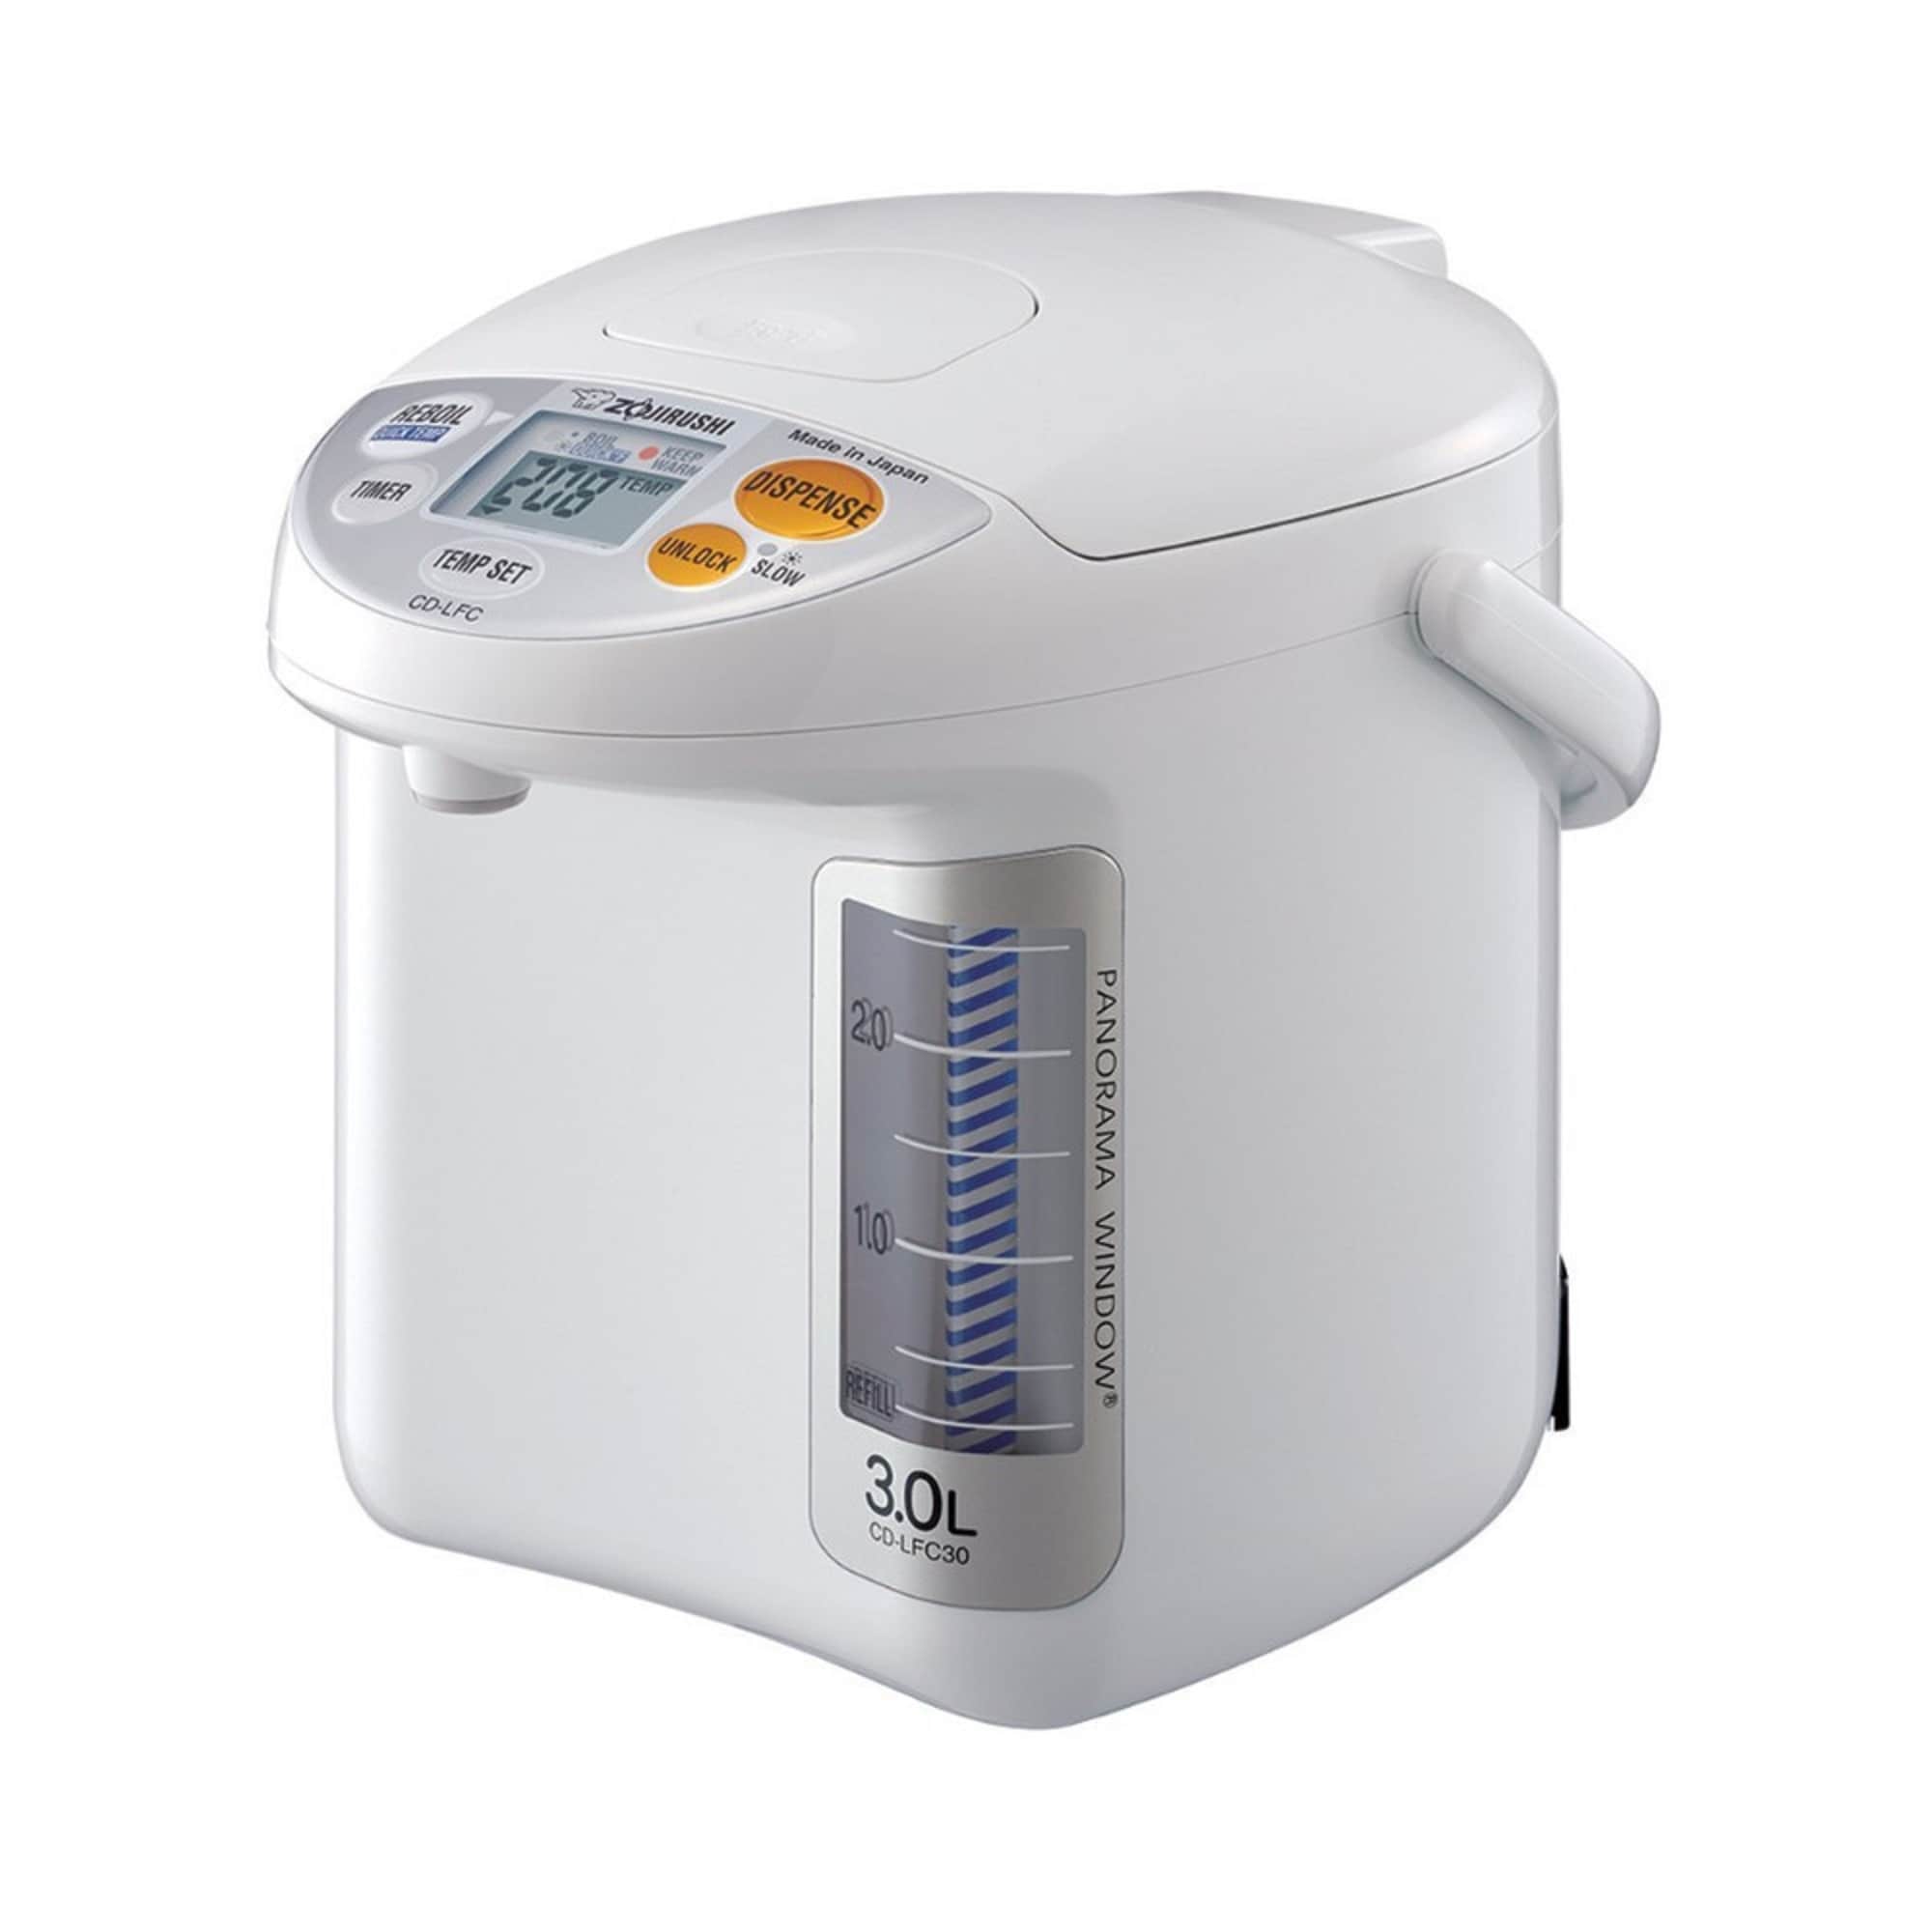 https://ak1.ostkcdn.com/images/products/is/images/direct/5e0bbba6700d970d5826556daa8479fa26ab7504/Zojirushi-CD-LFC30-Micom-Water-Boiler-and-Warmer-%28101-oz%2C-White%29.jpg